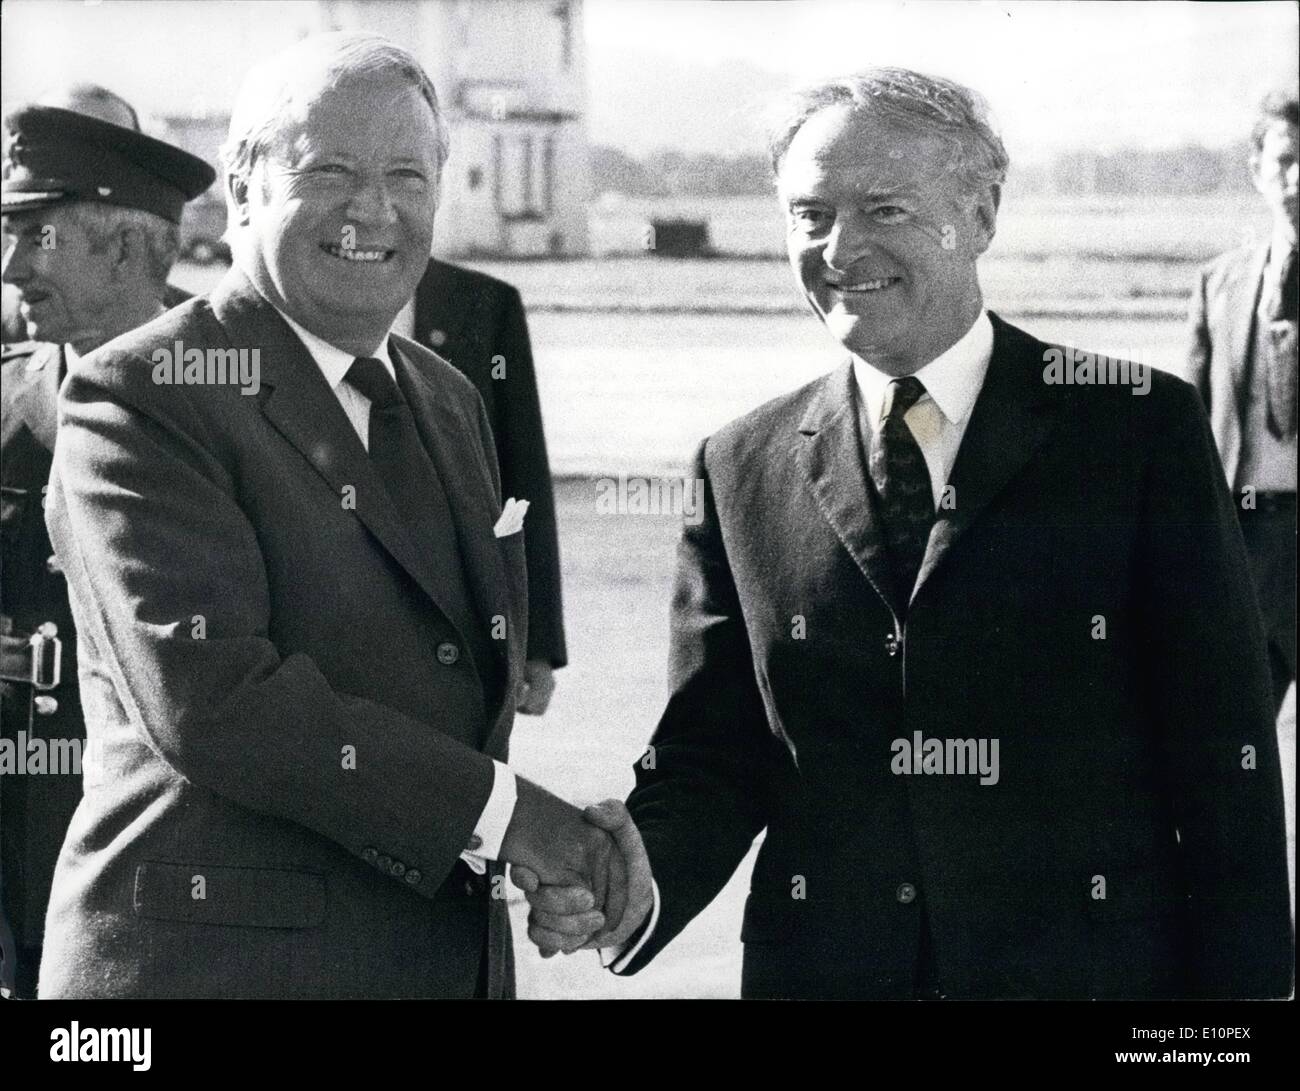 Sep. 09, 1973 - Mr. Heath, the Prime minister, yesterday visited Dublin, where he had talks with Mr. Liam Cosgrave, Prime Minister of Eire. Photo Shows Mr. Heath ( left ) being greeted by Mr. Cosgrave, at Baldonnell military airfield, near Dublin yesterday. Stock Photo